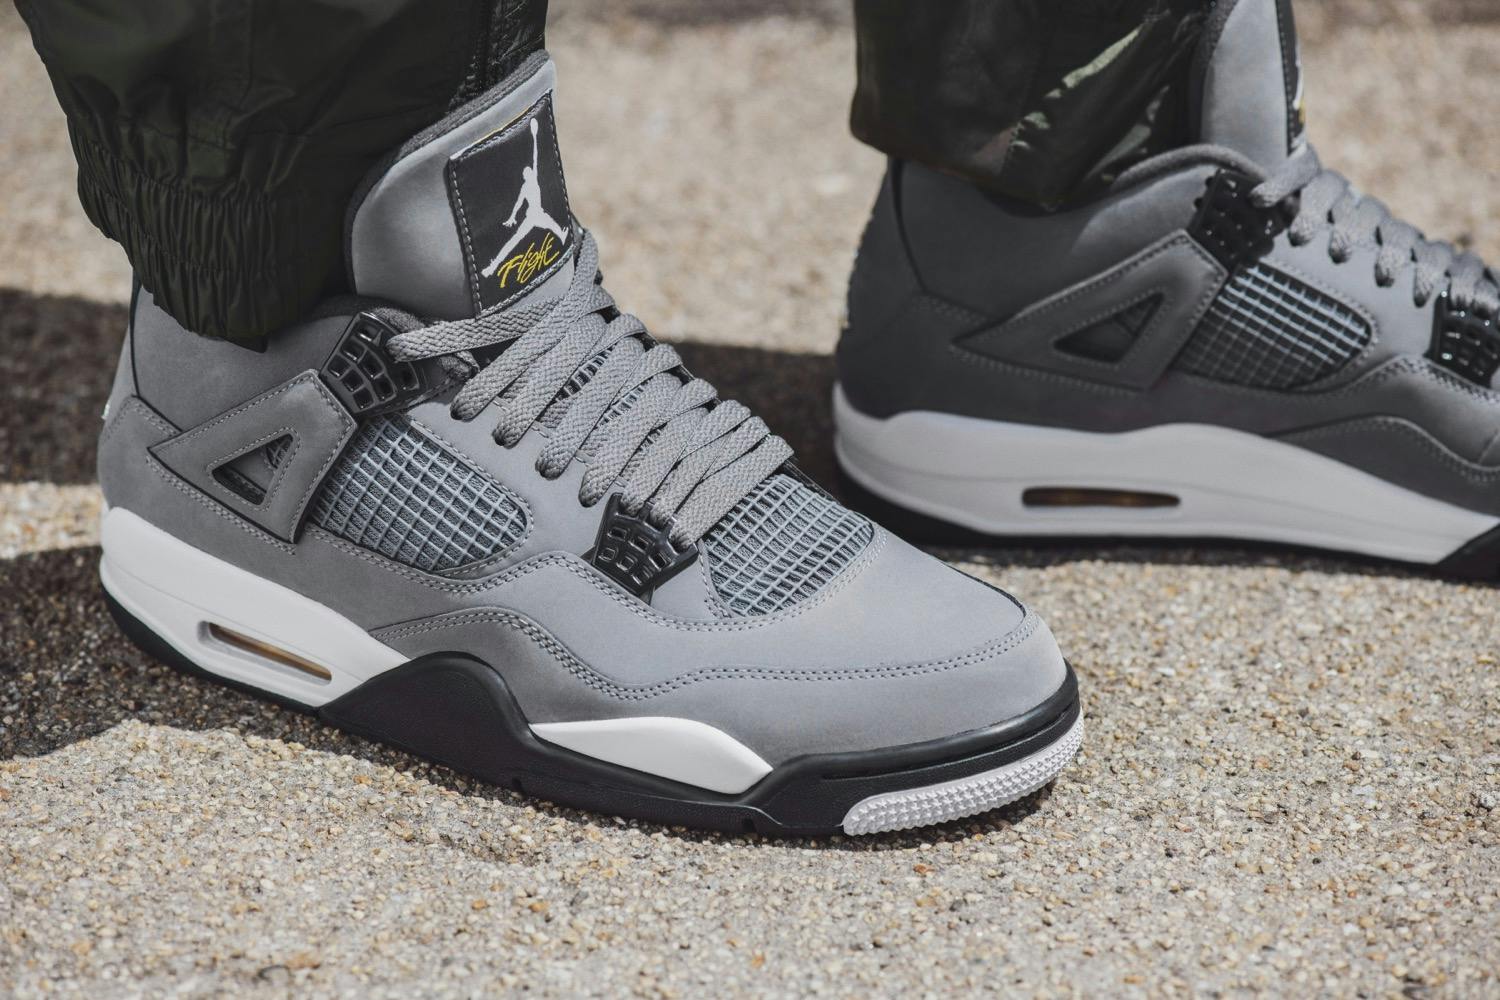 Nike Air Jordan 4 Retro 'Cool Grey' Register Now on END. Launches END.